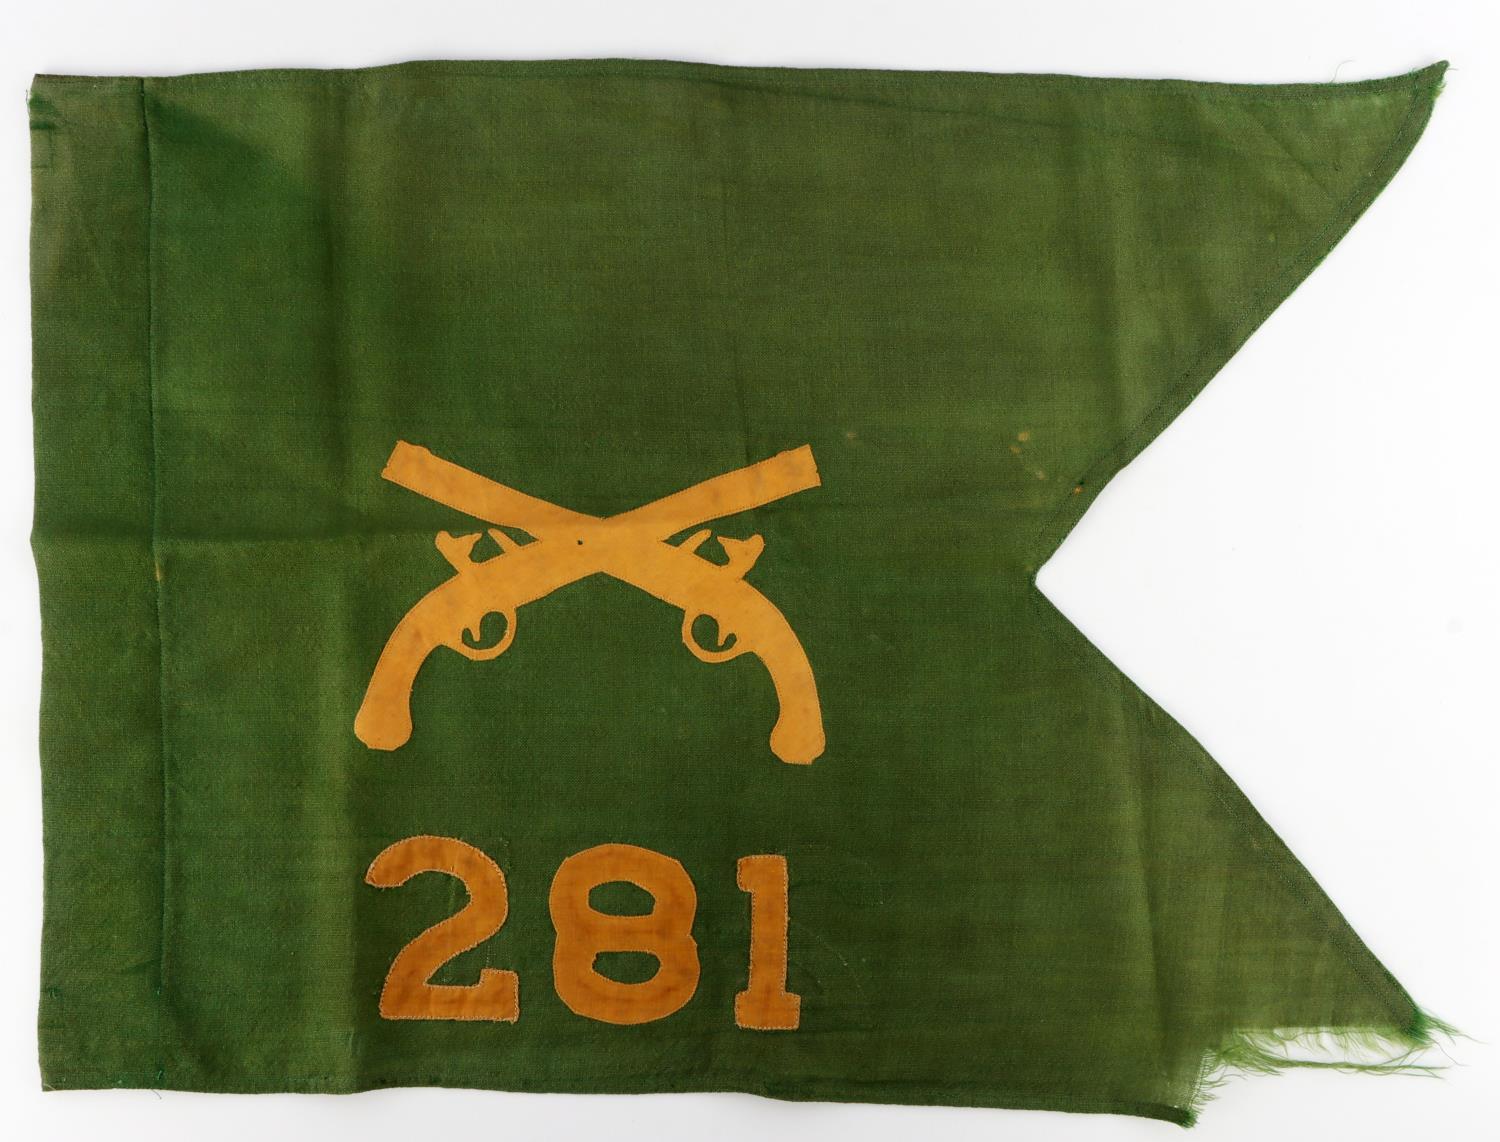 WWII US 281ST MILITARY POLICE GUIDON & HISTORY LTR